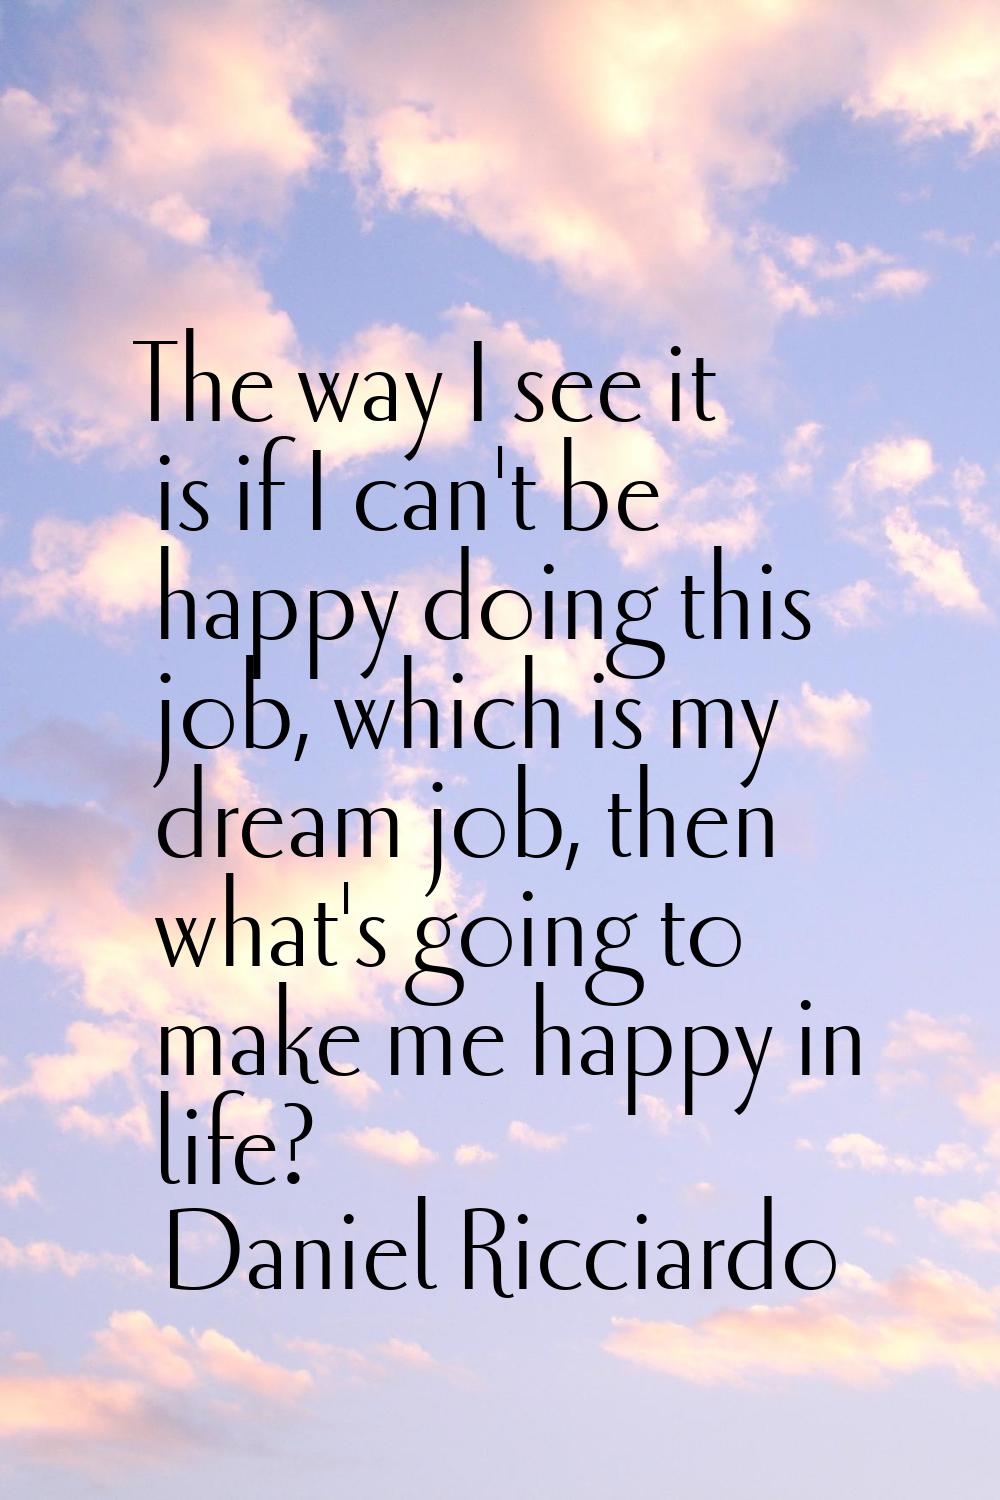 The way I see it is if I can't be happy doing this job, which is my dream job, then what's going to